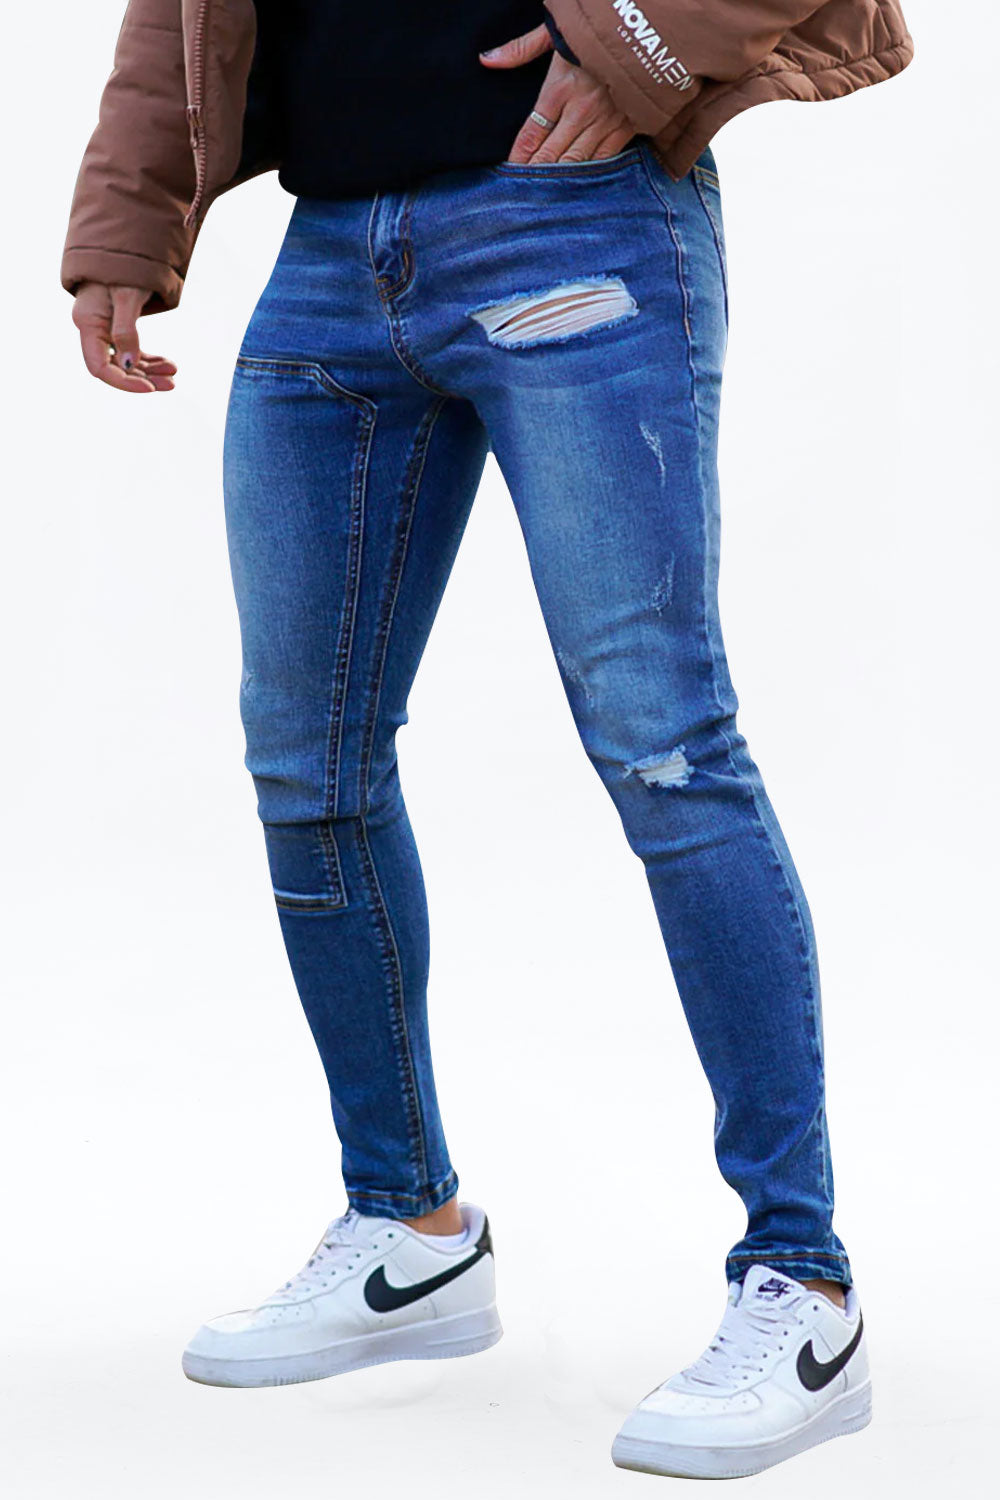 Gingtto Trendy Ripped Dark Blue Knee Skinny Fashion Jeans for Men - 28